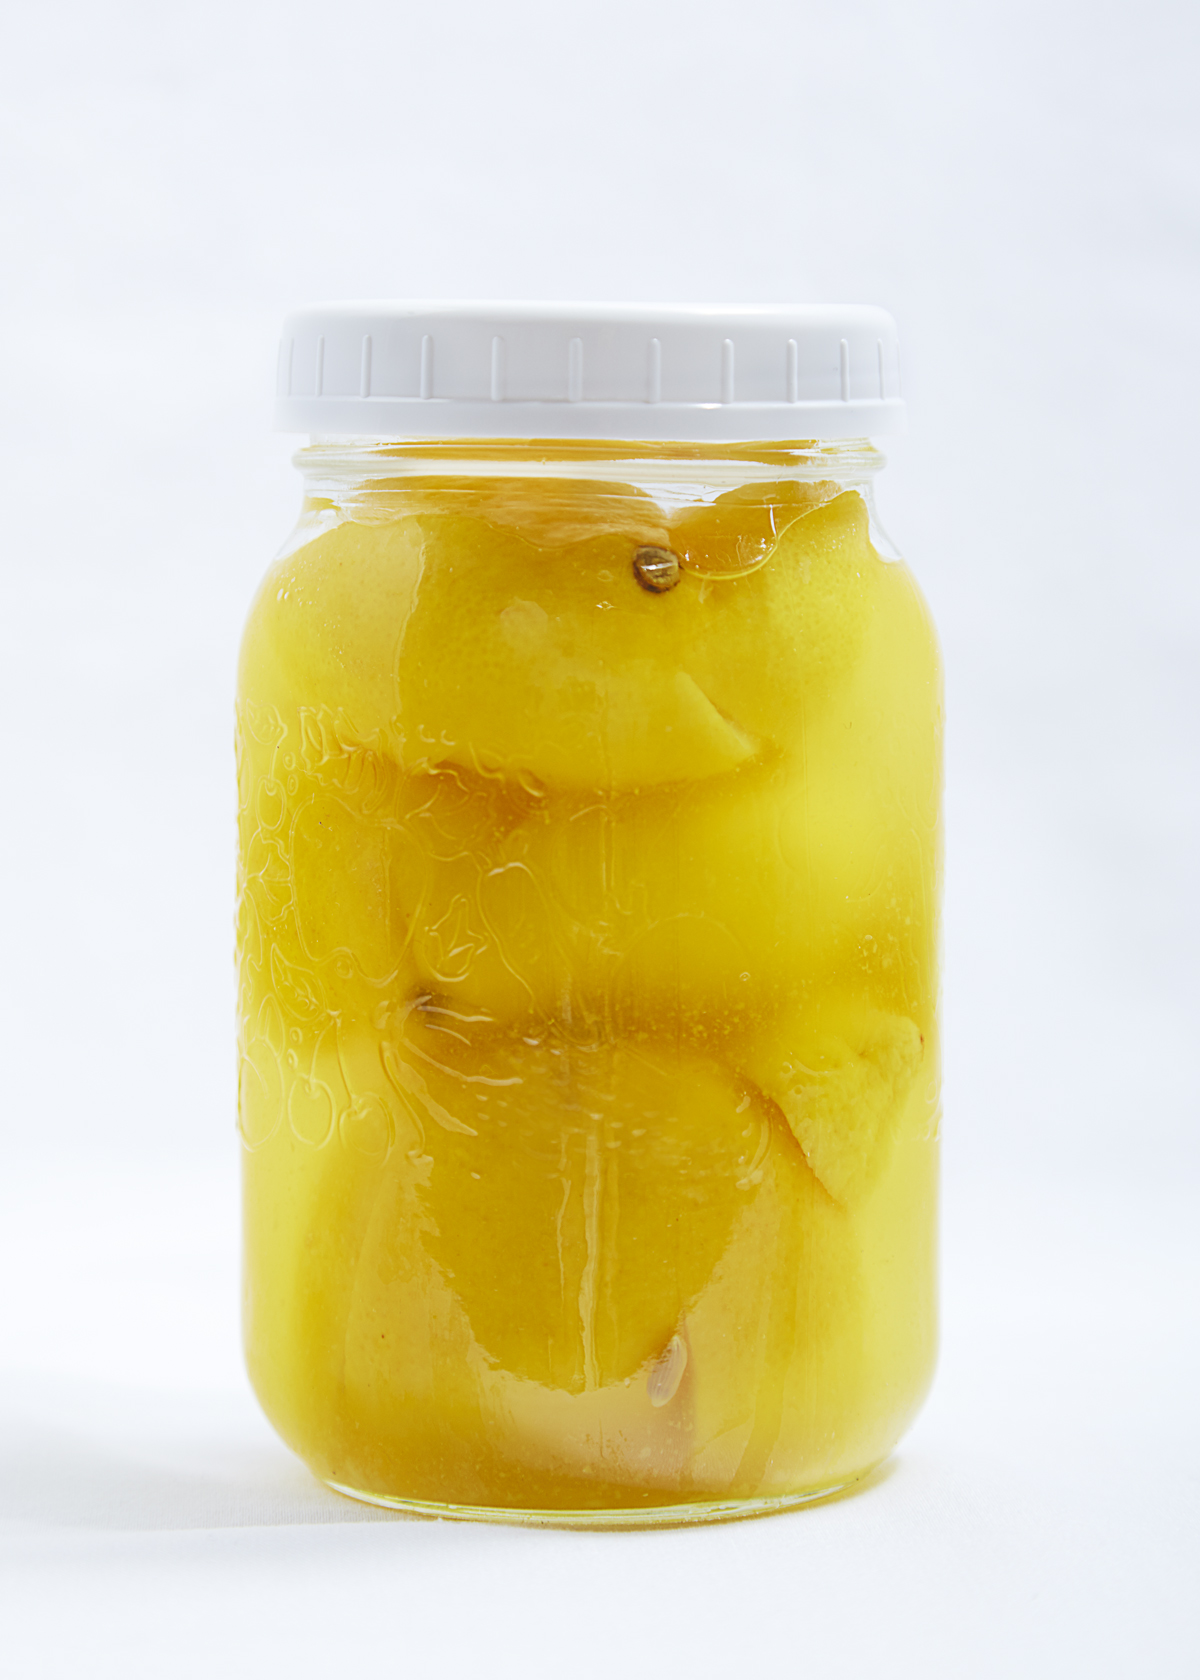 Lacto-Fermented Lemons (Moroccan-style) - The Cultured Foodie